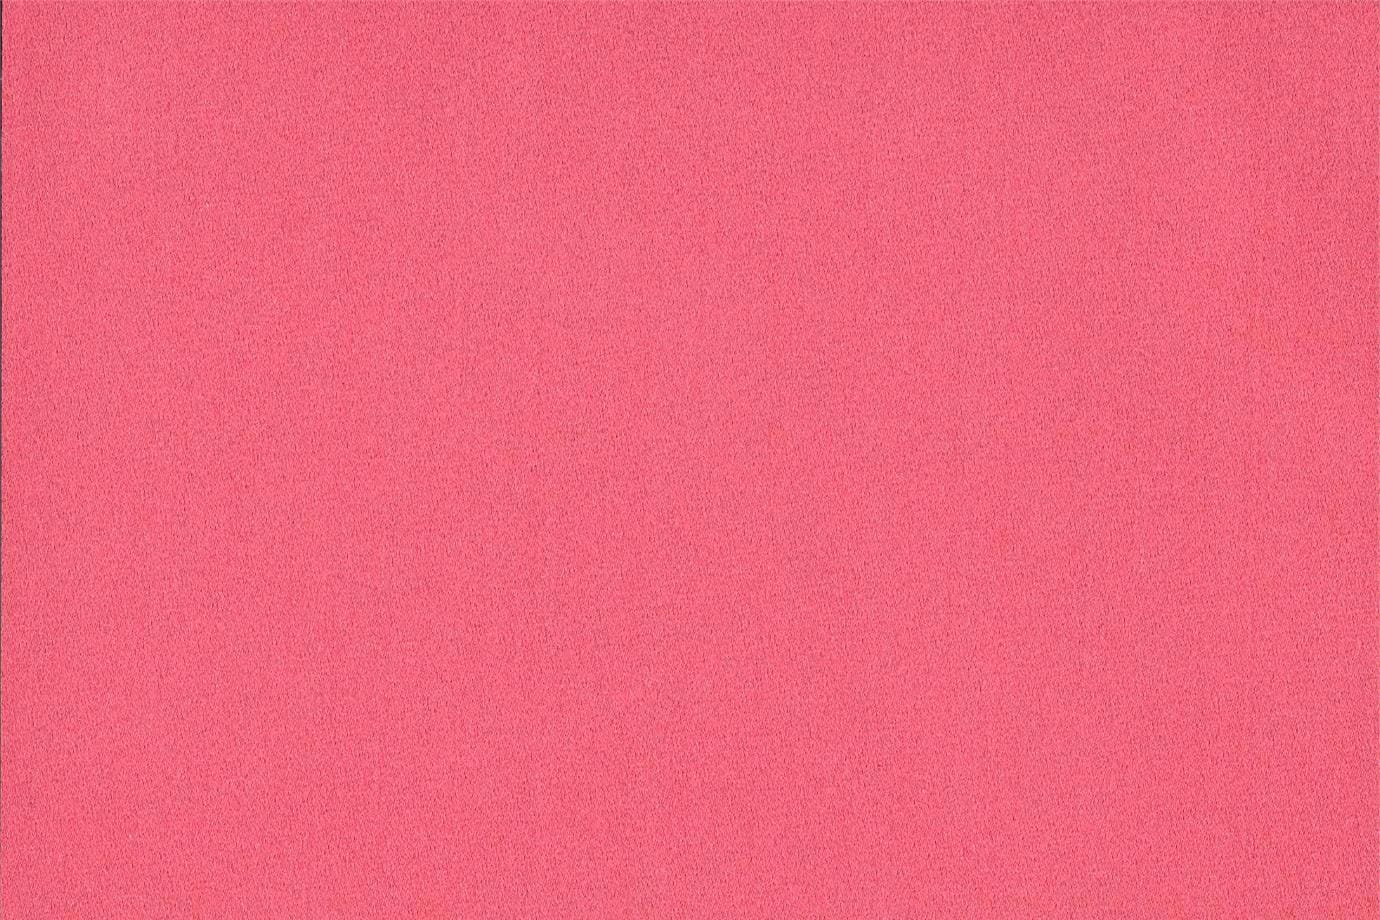 Tissu d'ameublement J1594 MEO PATACCA 015 Rosa